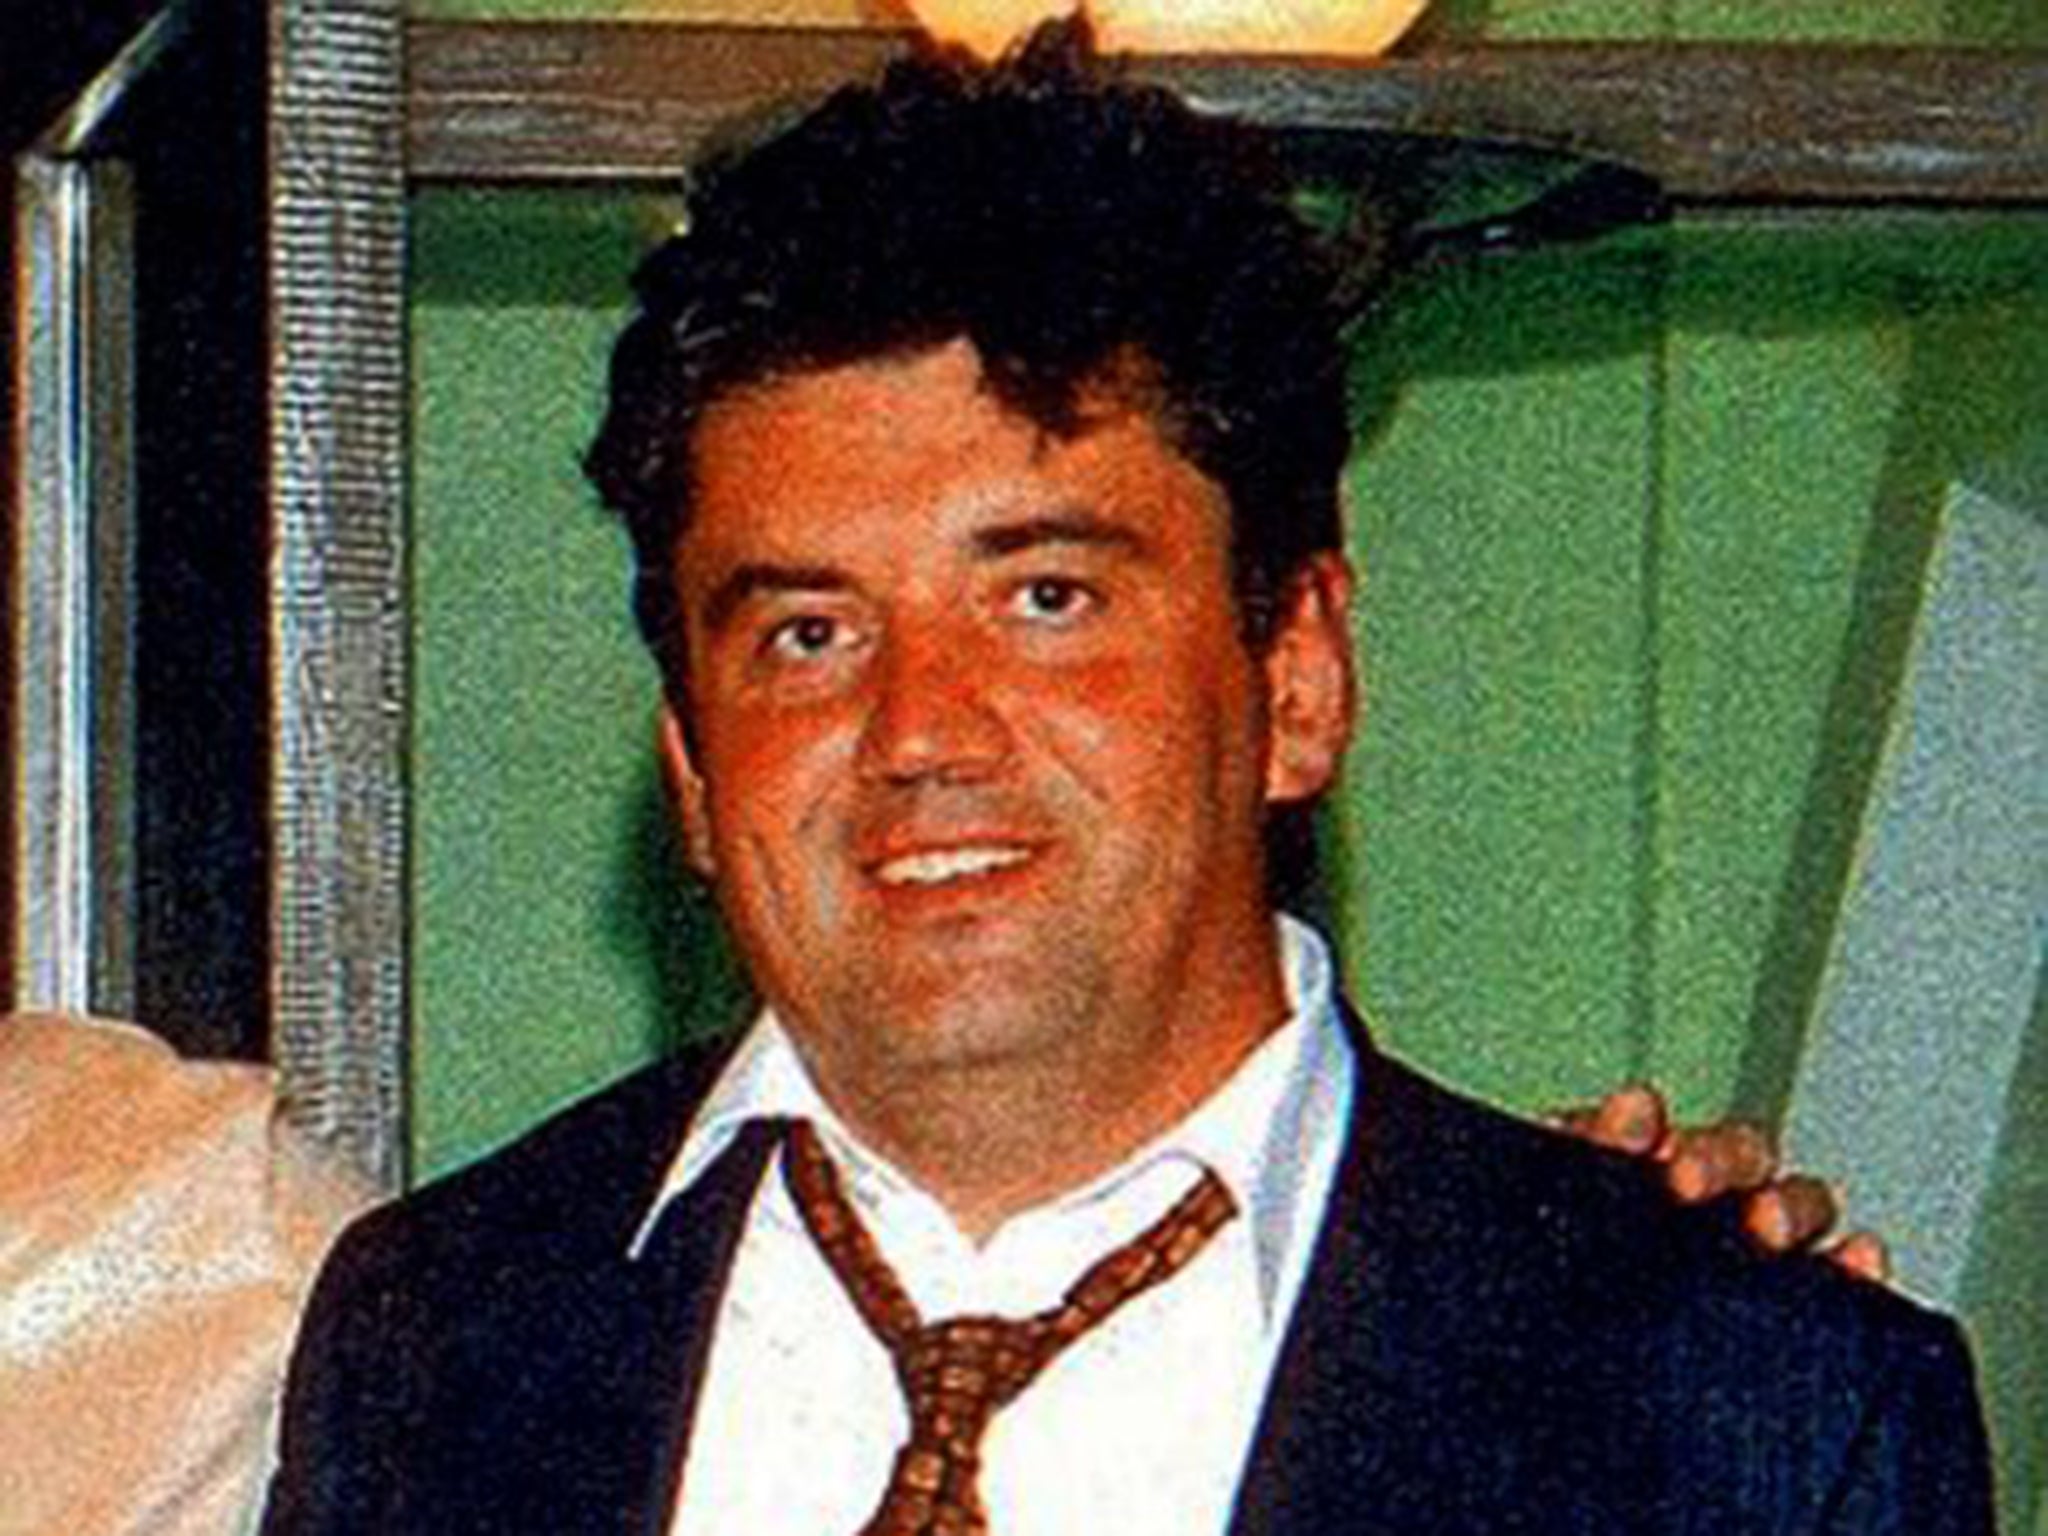 Alexander Perepilichnyy died while jogging near his home in Surrey